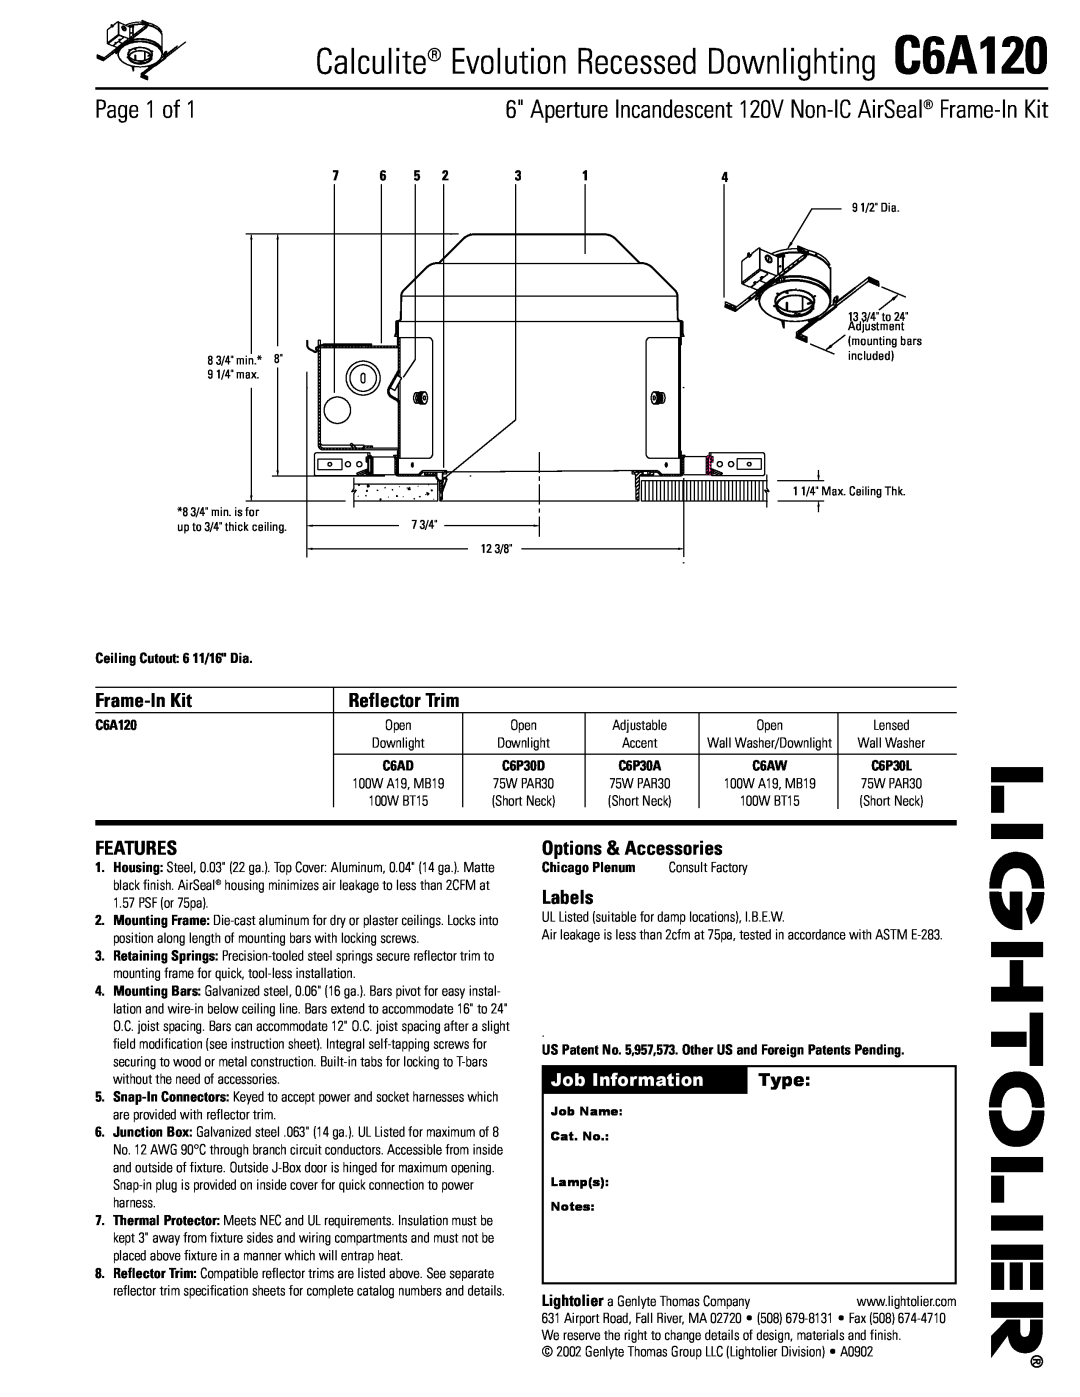 Lightolier instruction sheet Calculite Evolution Recessed Downlighting C6A120, Page 1 of, Frame-InKit, Features, Labels 